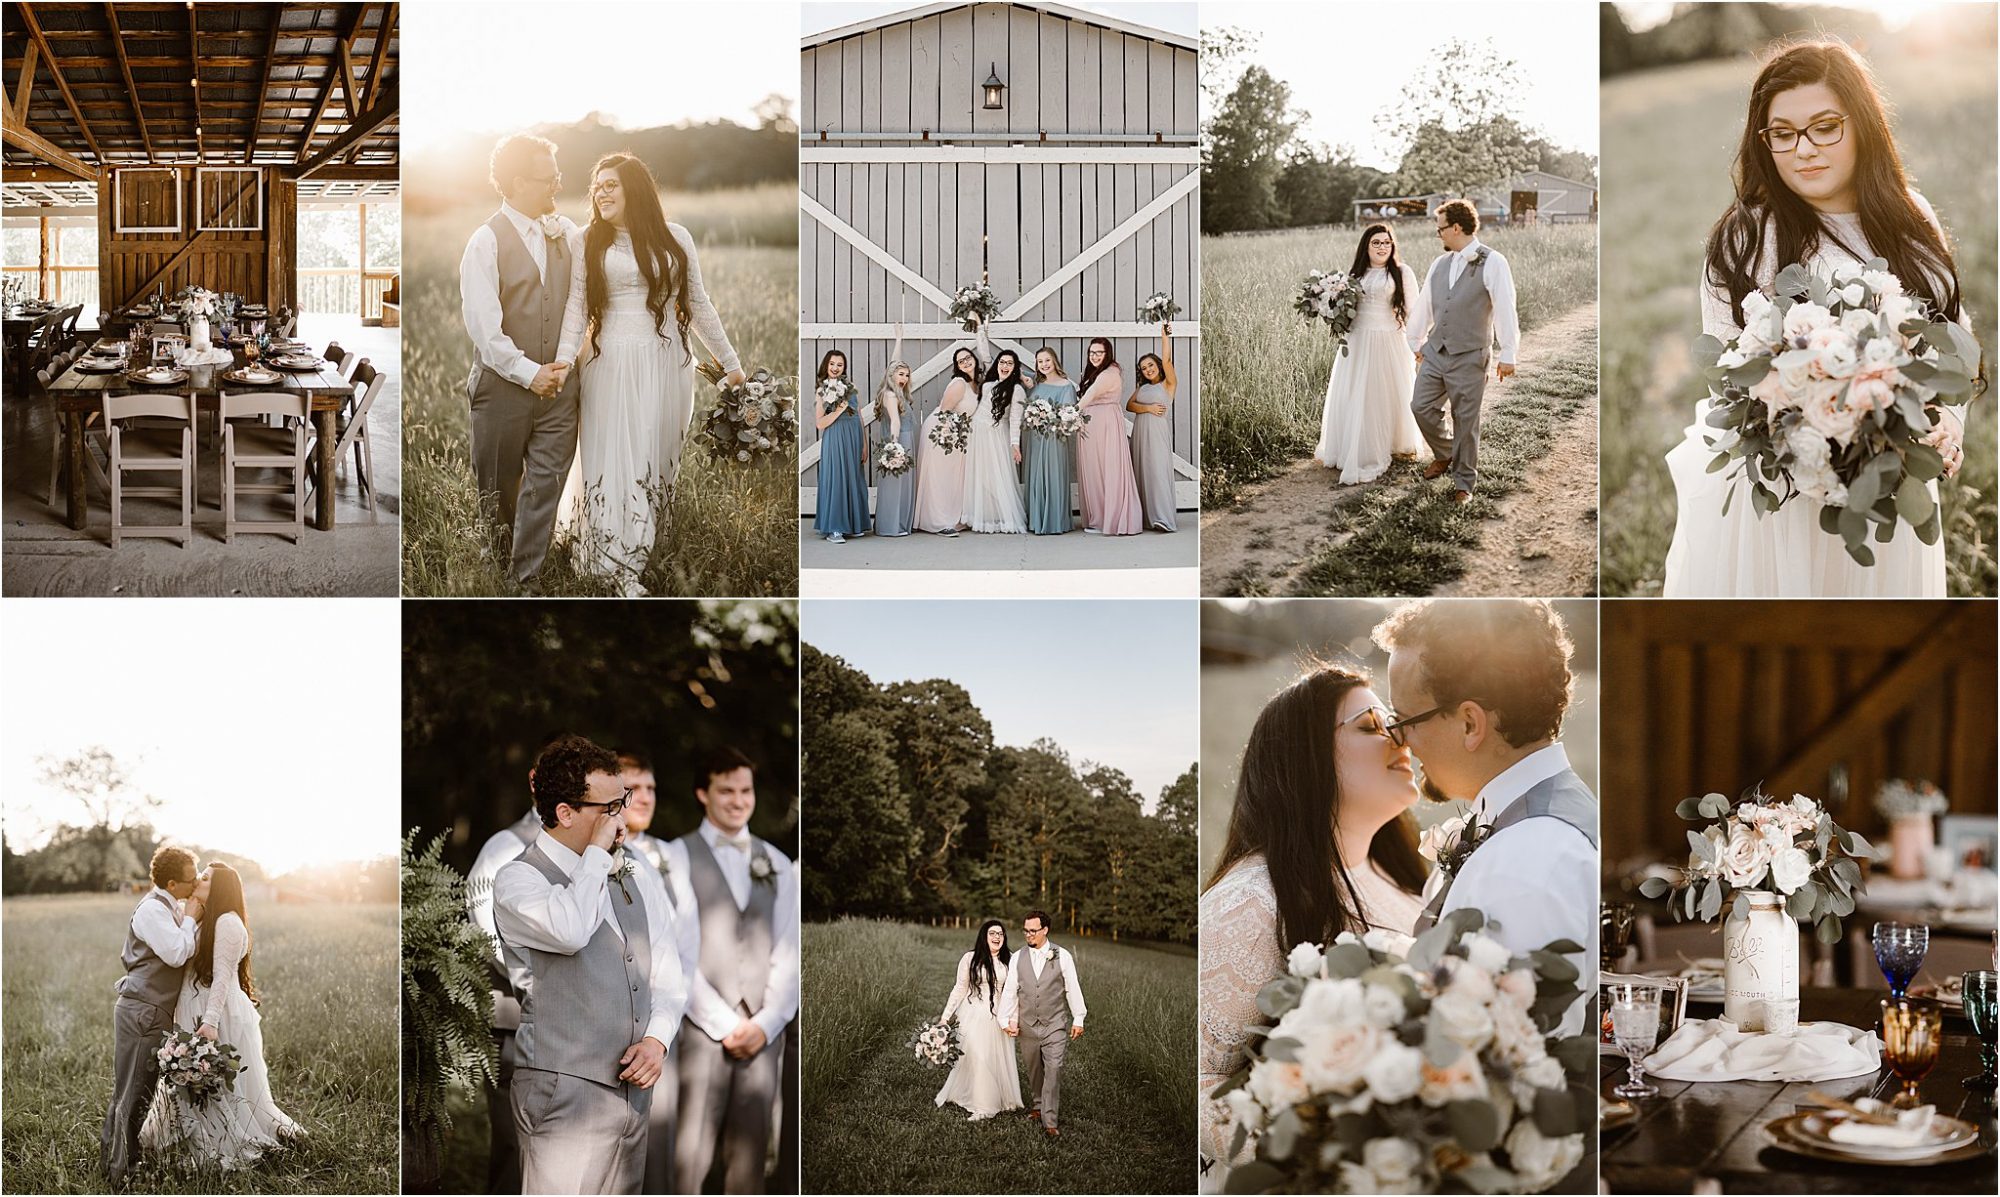 SUn-Kissed Rustic Glam Wedding at Heartland Meadows Knoxville